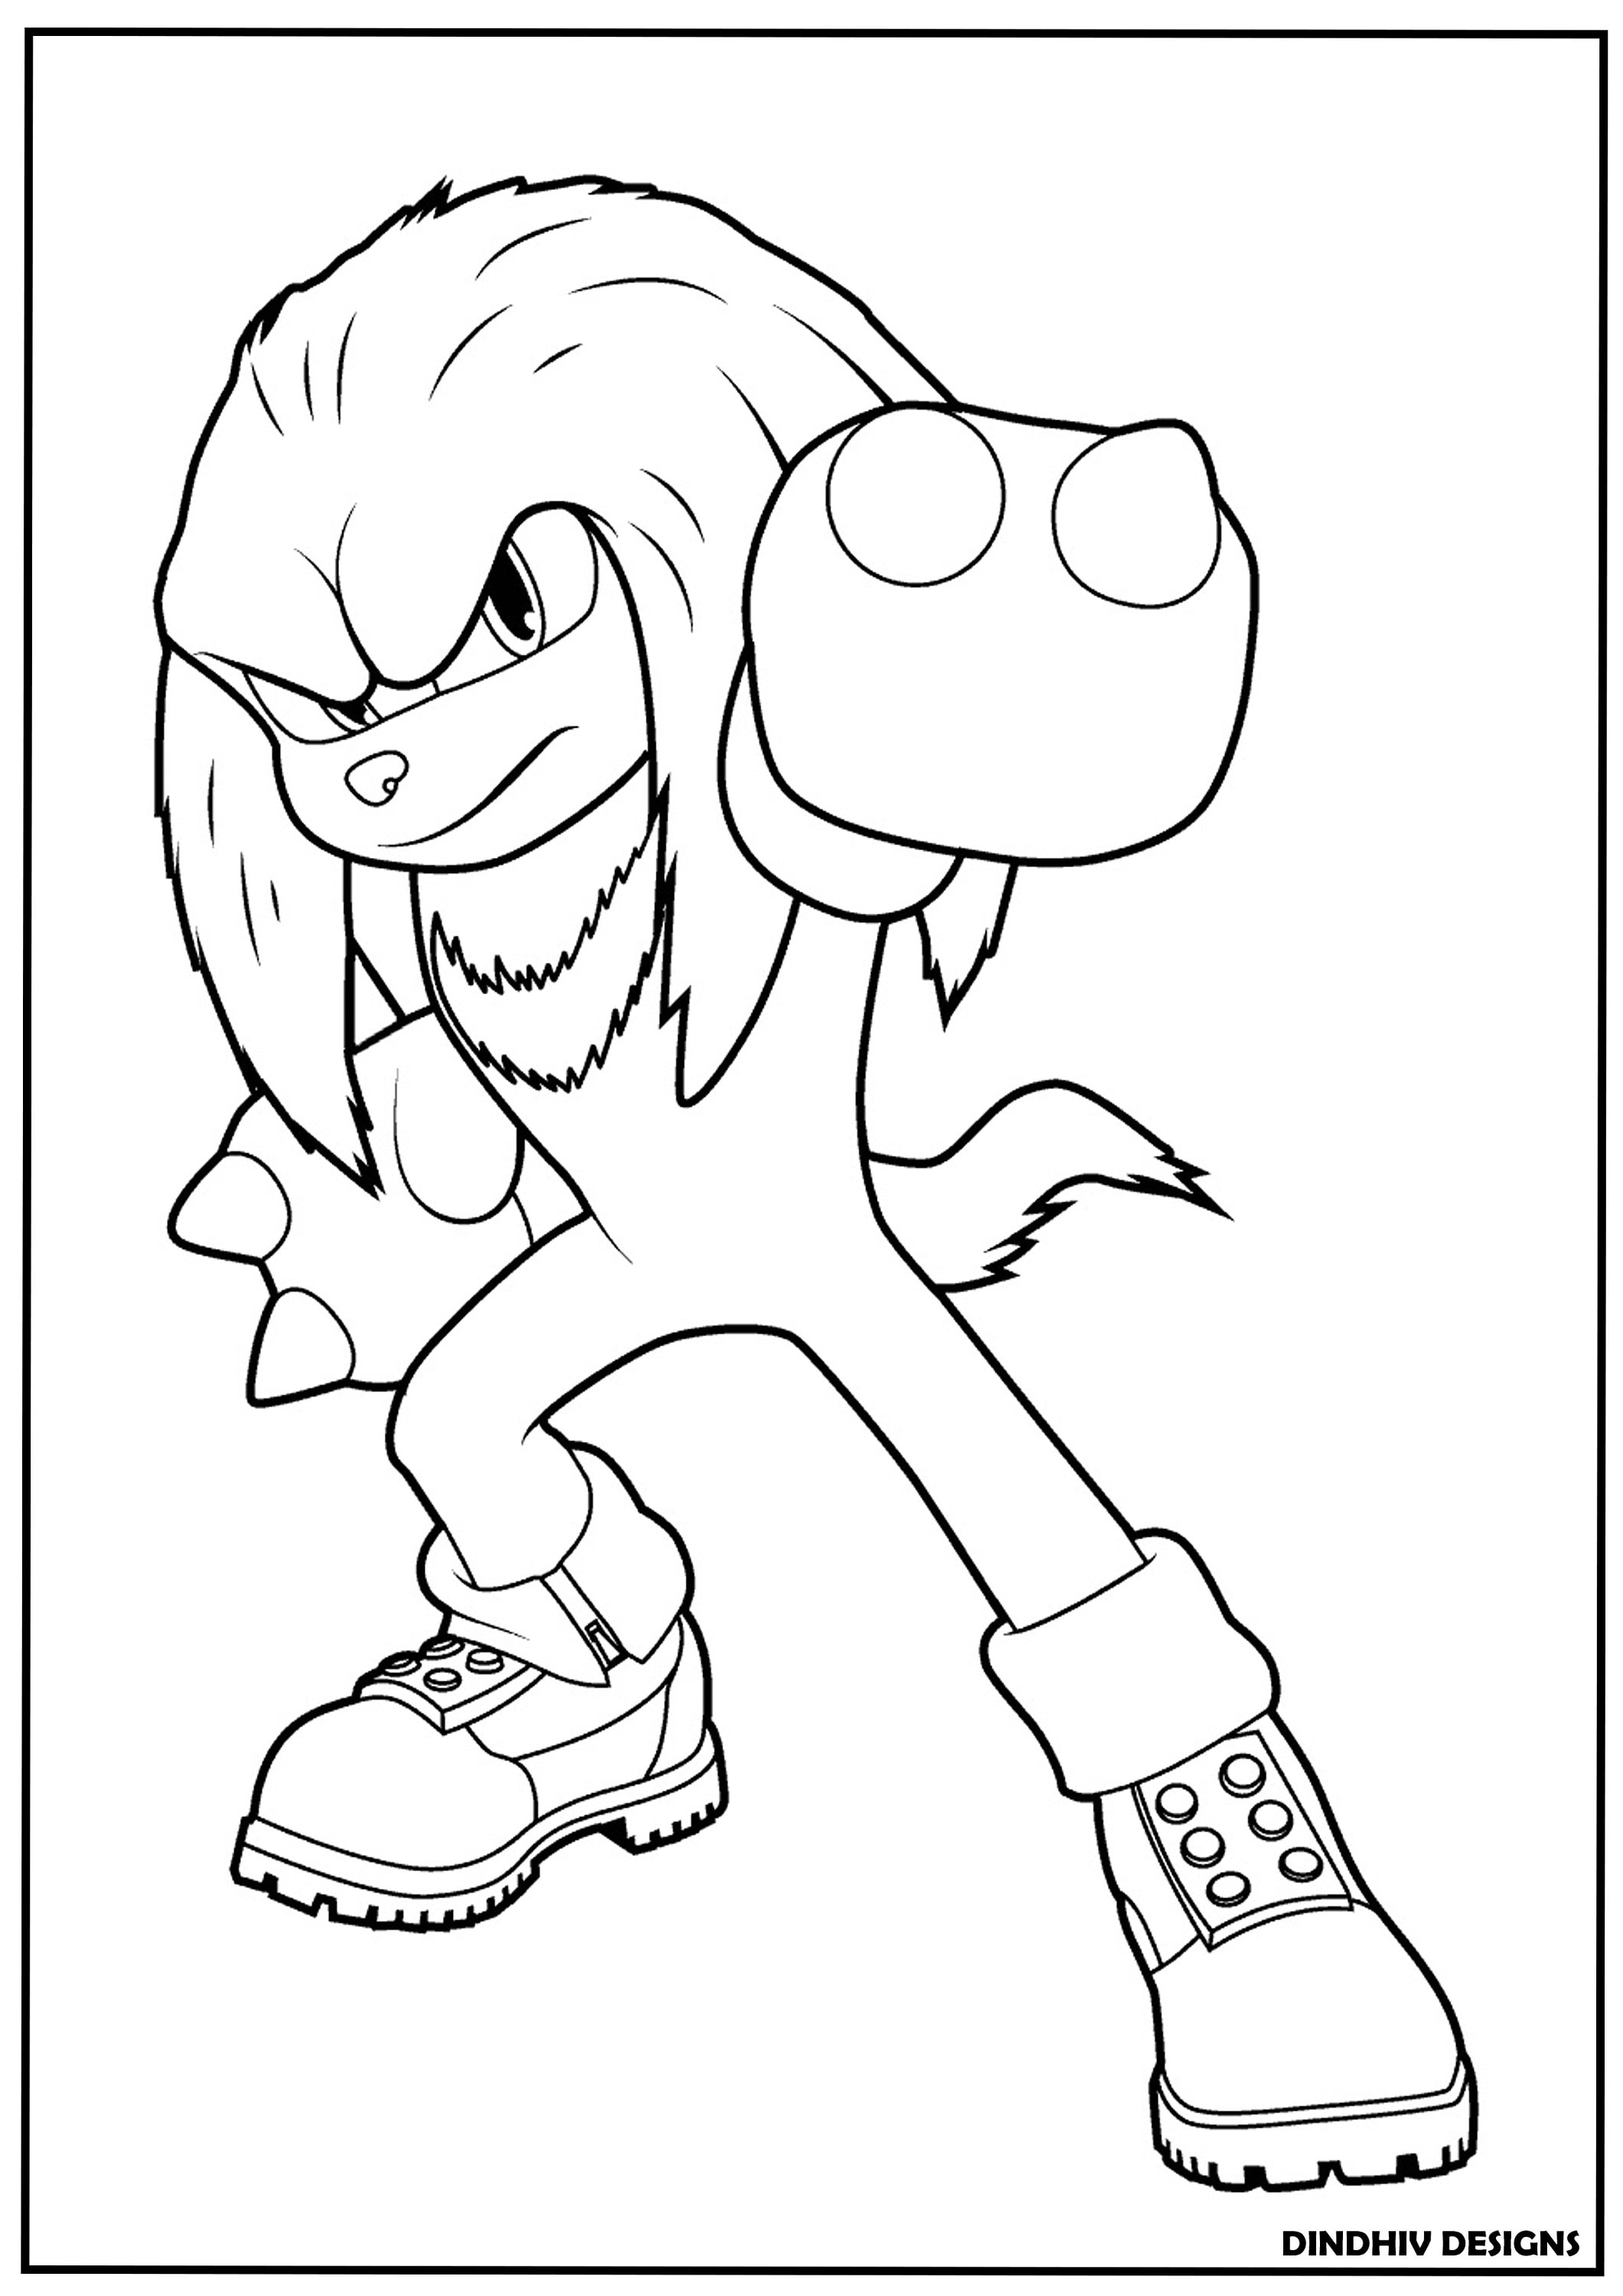 Sonic the Hedgehog 2 Movie Coloring Pages Ready to Print - Etsy